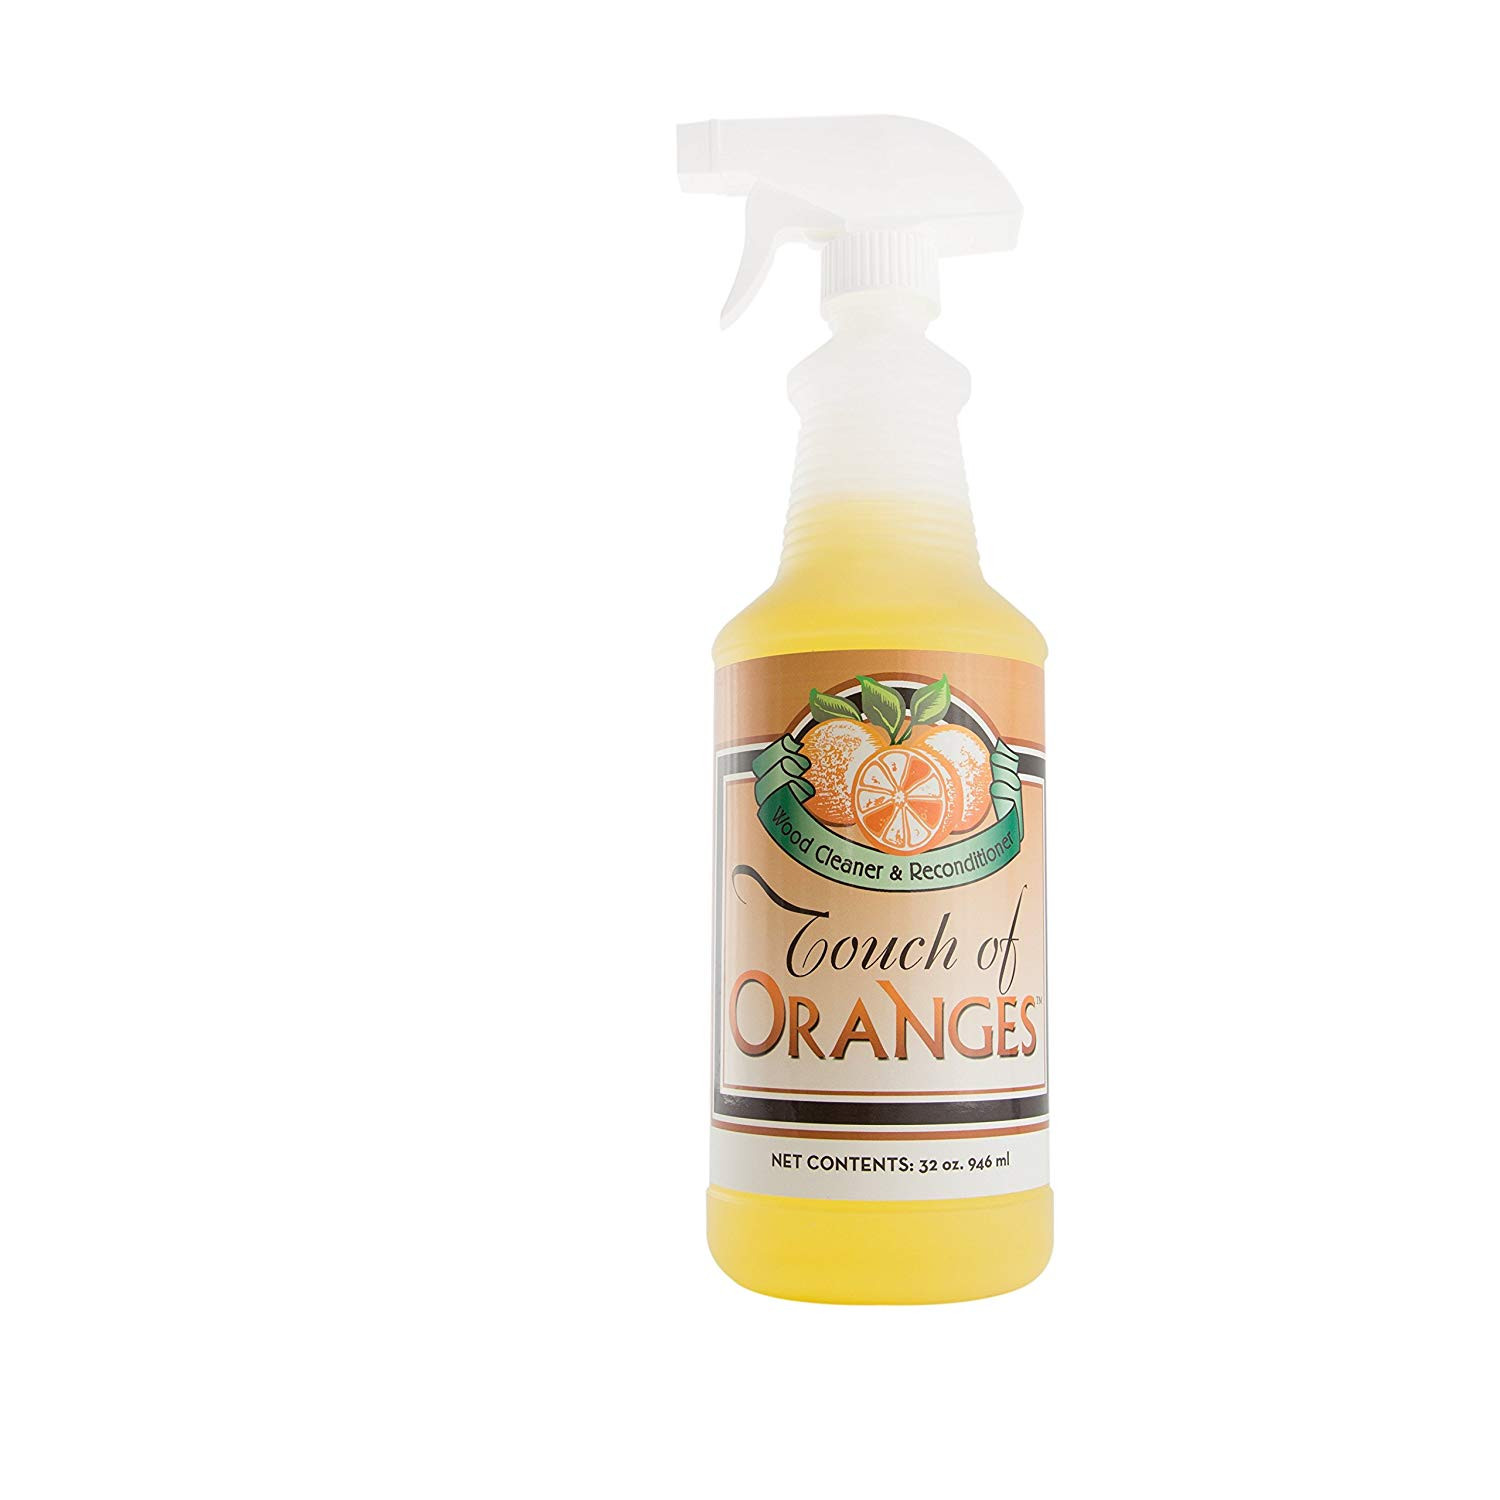 cleaning bruce hardwood floors care maintenance of amazon com touch of oranges wood cleaner 32 oz orange luster finish inside amazon com touch of oranges wood cleaner 32 oz orange luster finish cleaner for kitchen cabinets harwood floors and all wood home kitchen